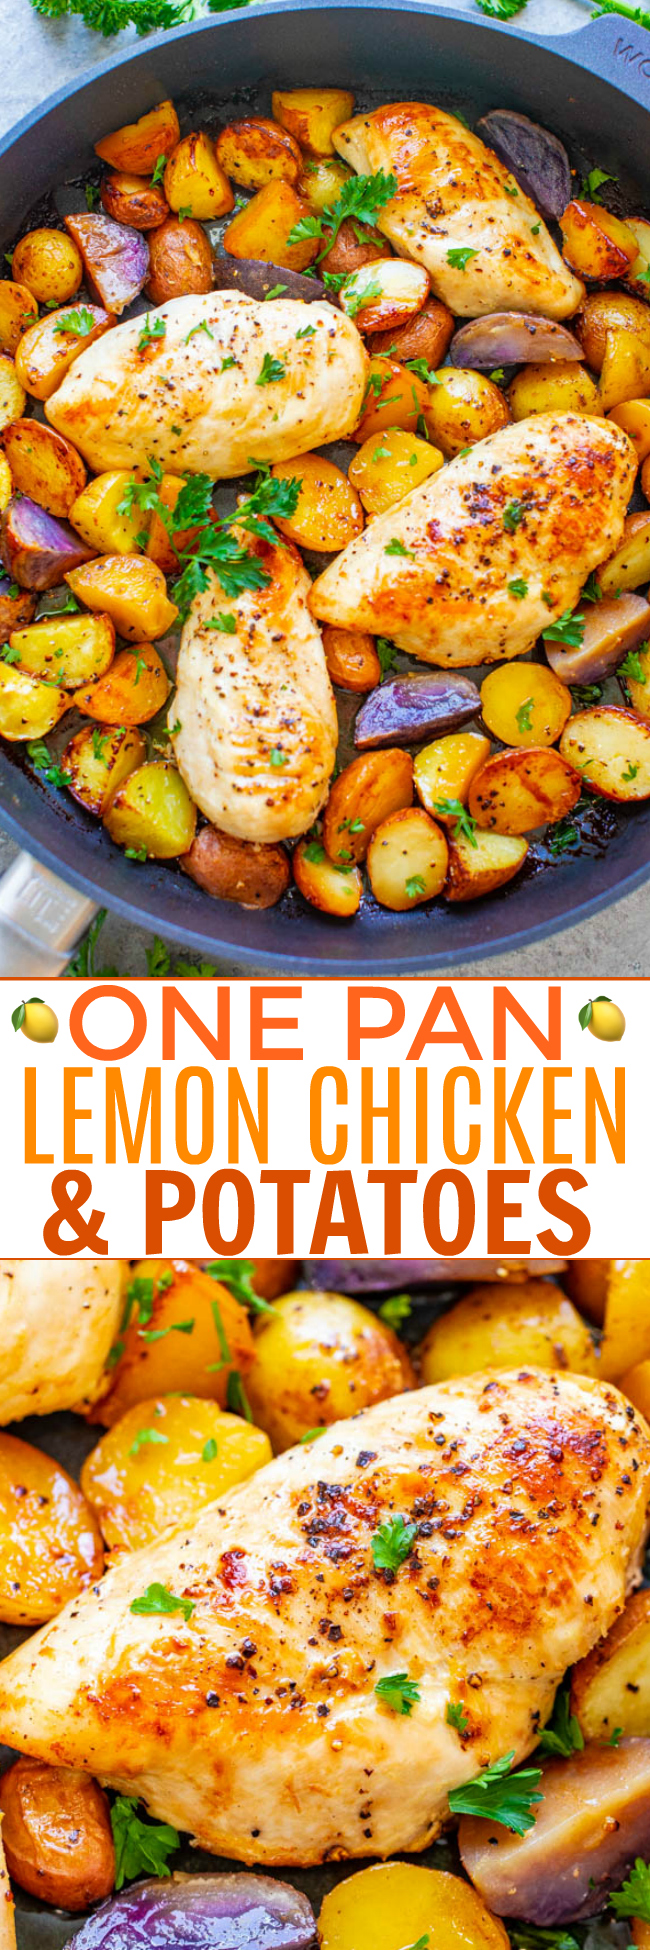 One Pan Lemon Butter Chicken and Potatoes - A DELICIOUS family dinner that's ready in 30 minutes and full of lemon buttery goodness!! ONE PAN keeps things EASY for you with less dishes!!